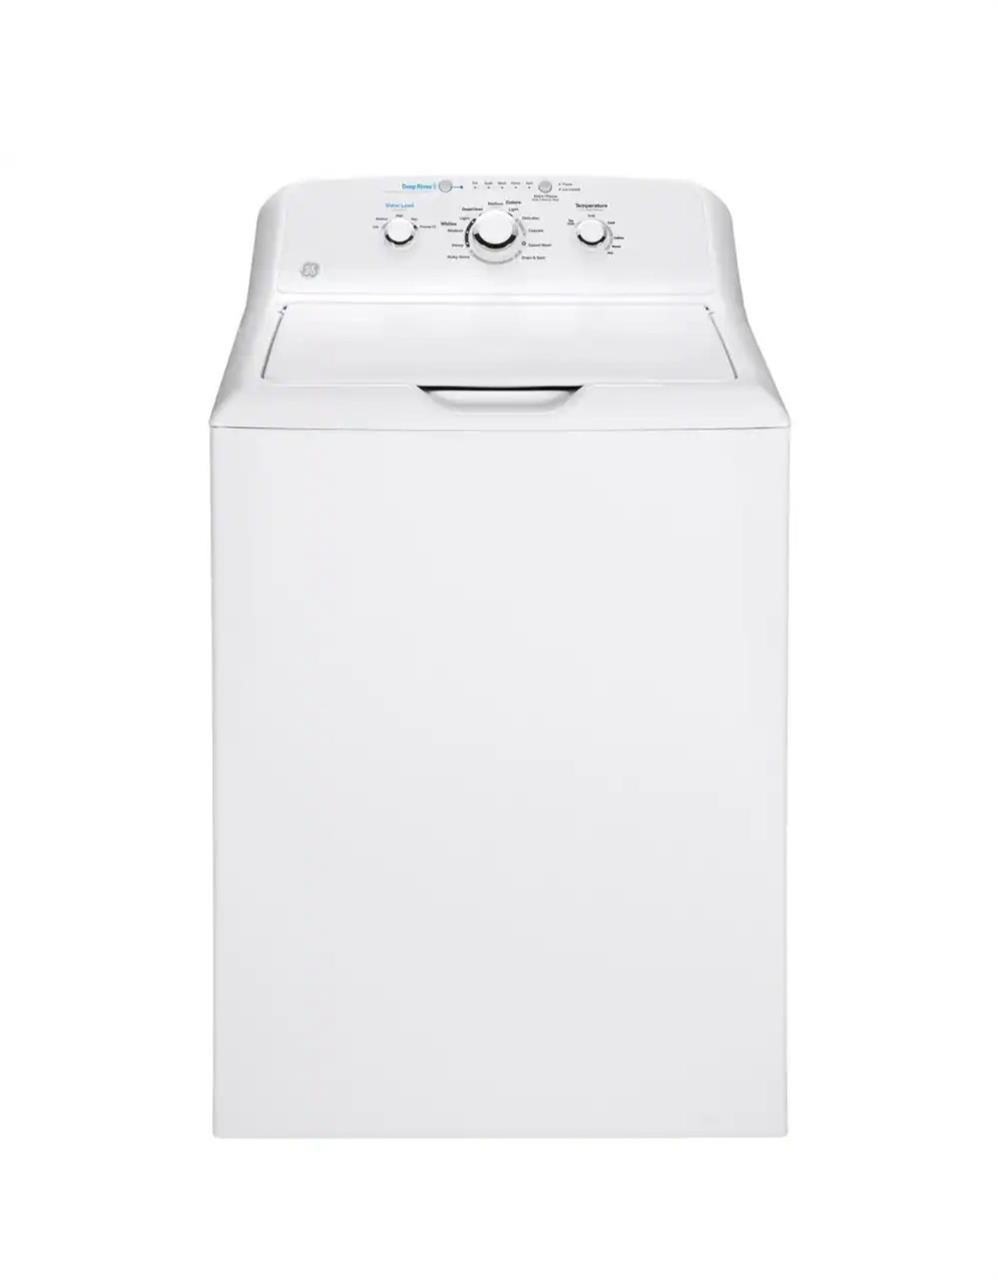 GE 4.0 cu. ft. Washer in White